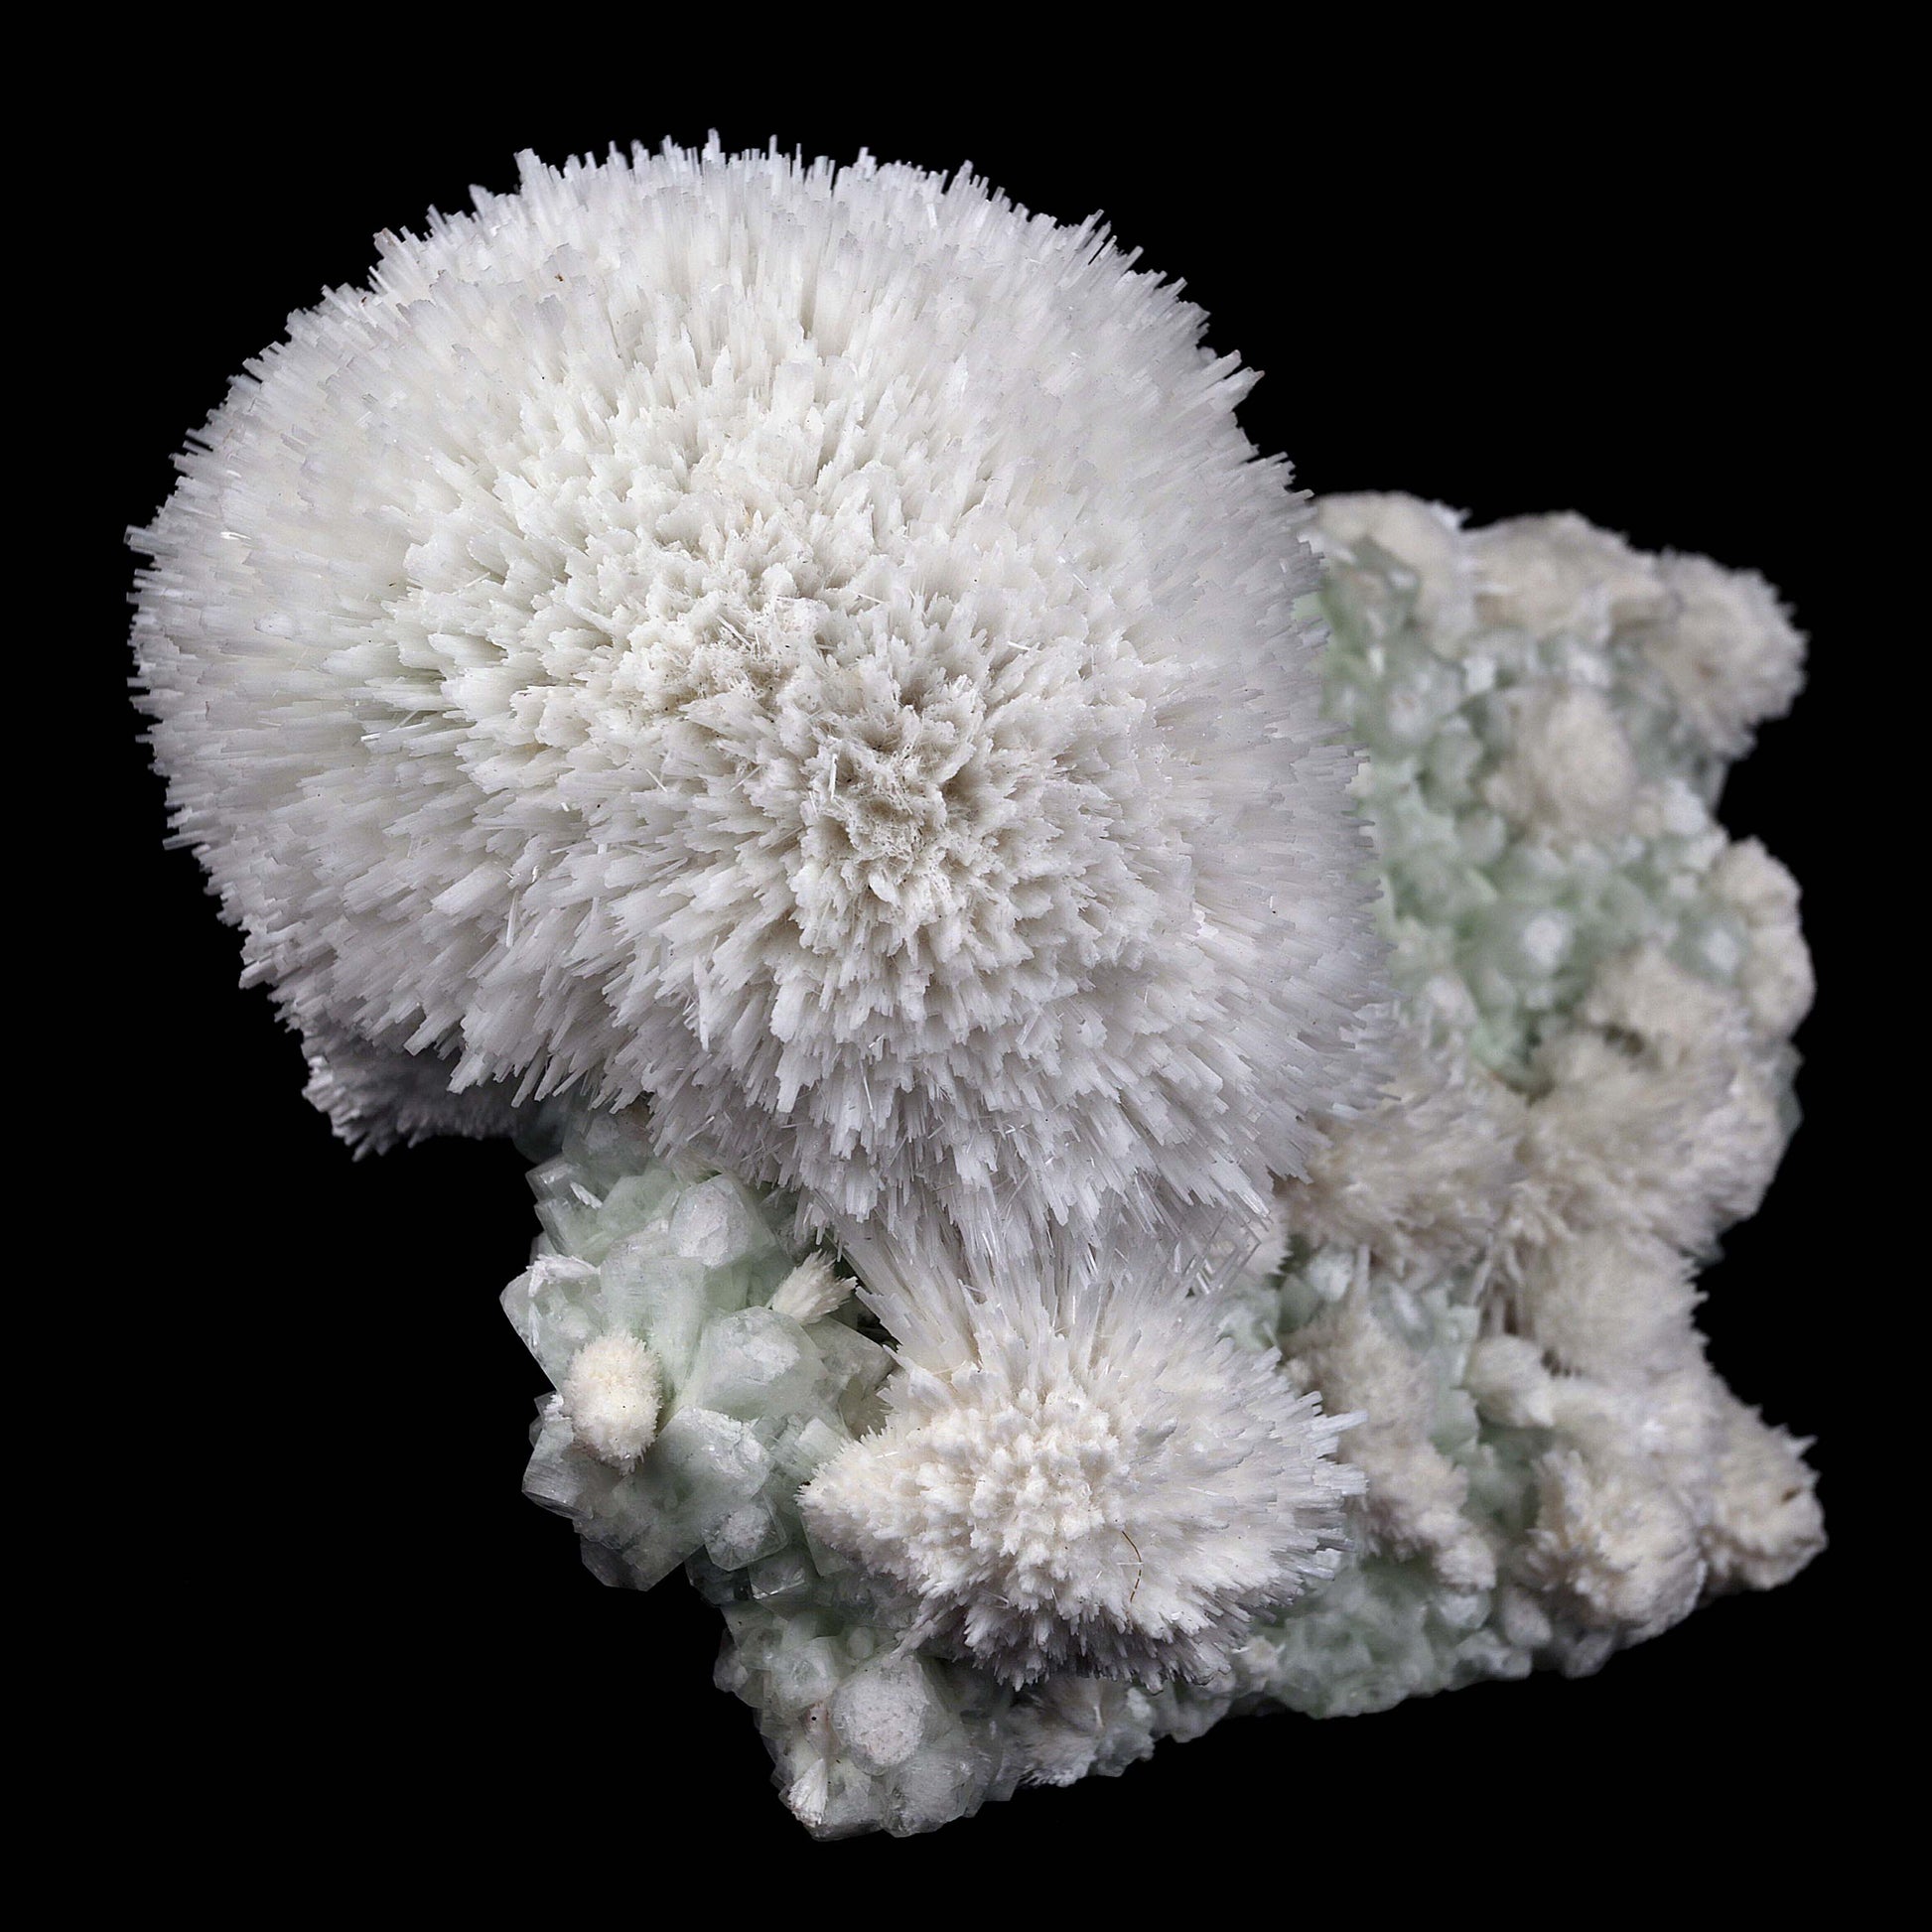 Scolecite Hemispheres with Apophyllite on Stilibite Natural Mineral Sp…  https://www.superbminerals.us/products/scolecite-hemispheres-with-apophyllite-on-stilibite-natural-mineral-specimen-b-4421  Features:A stunning specimen featuring a large, hemispherical formation of colorless, transparent, lustrous acicular Scolecite crystals on peach-colored Stilbite. An amazing piece with superb crystal formation, contrast, luster and contrast. In excellent condition. A great addition to any collection.